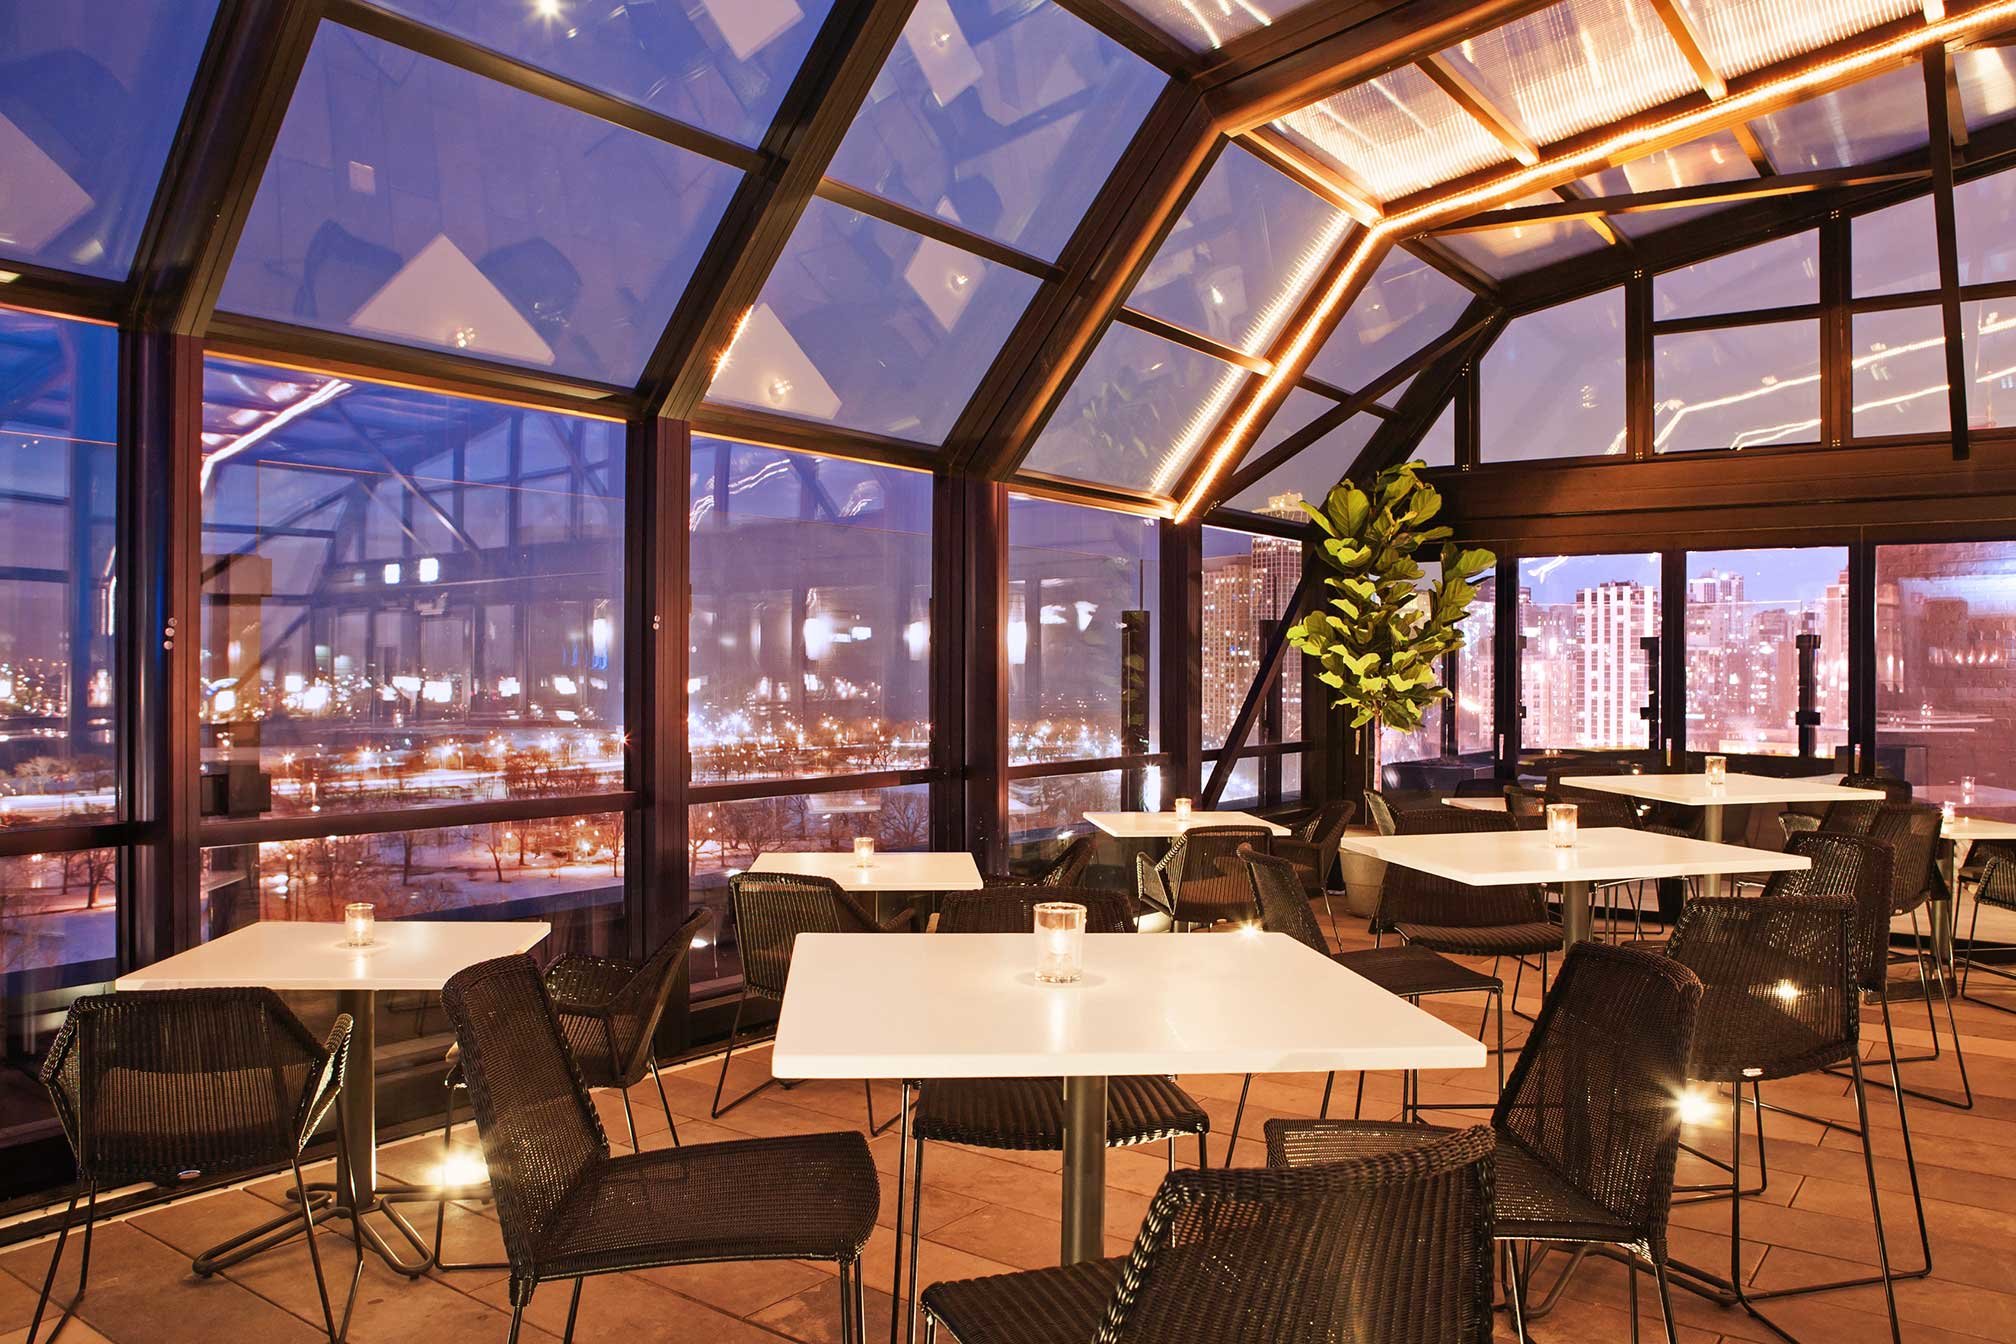 best rooftop bars chicago, chicago bars, chicago rooftop bars, rooftop bar, rooftop restaurants chicago